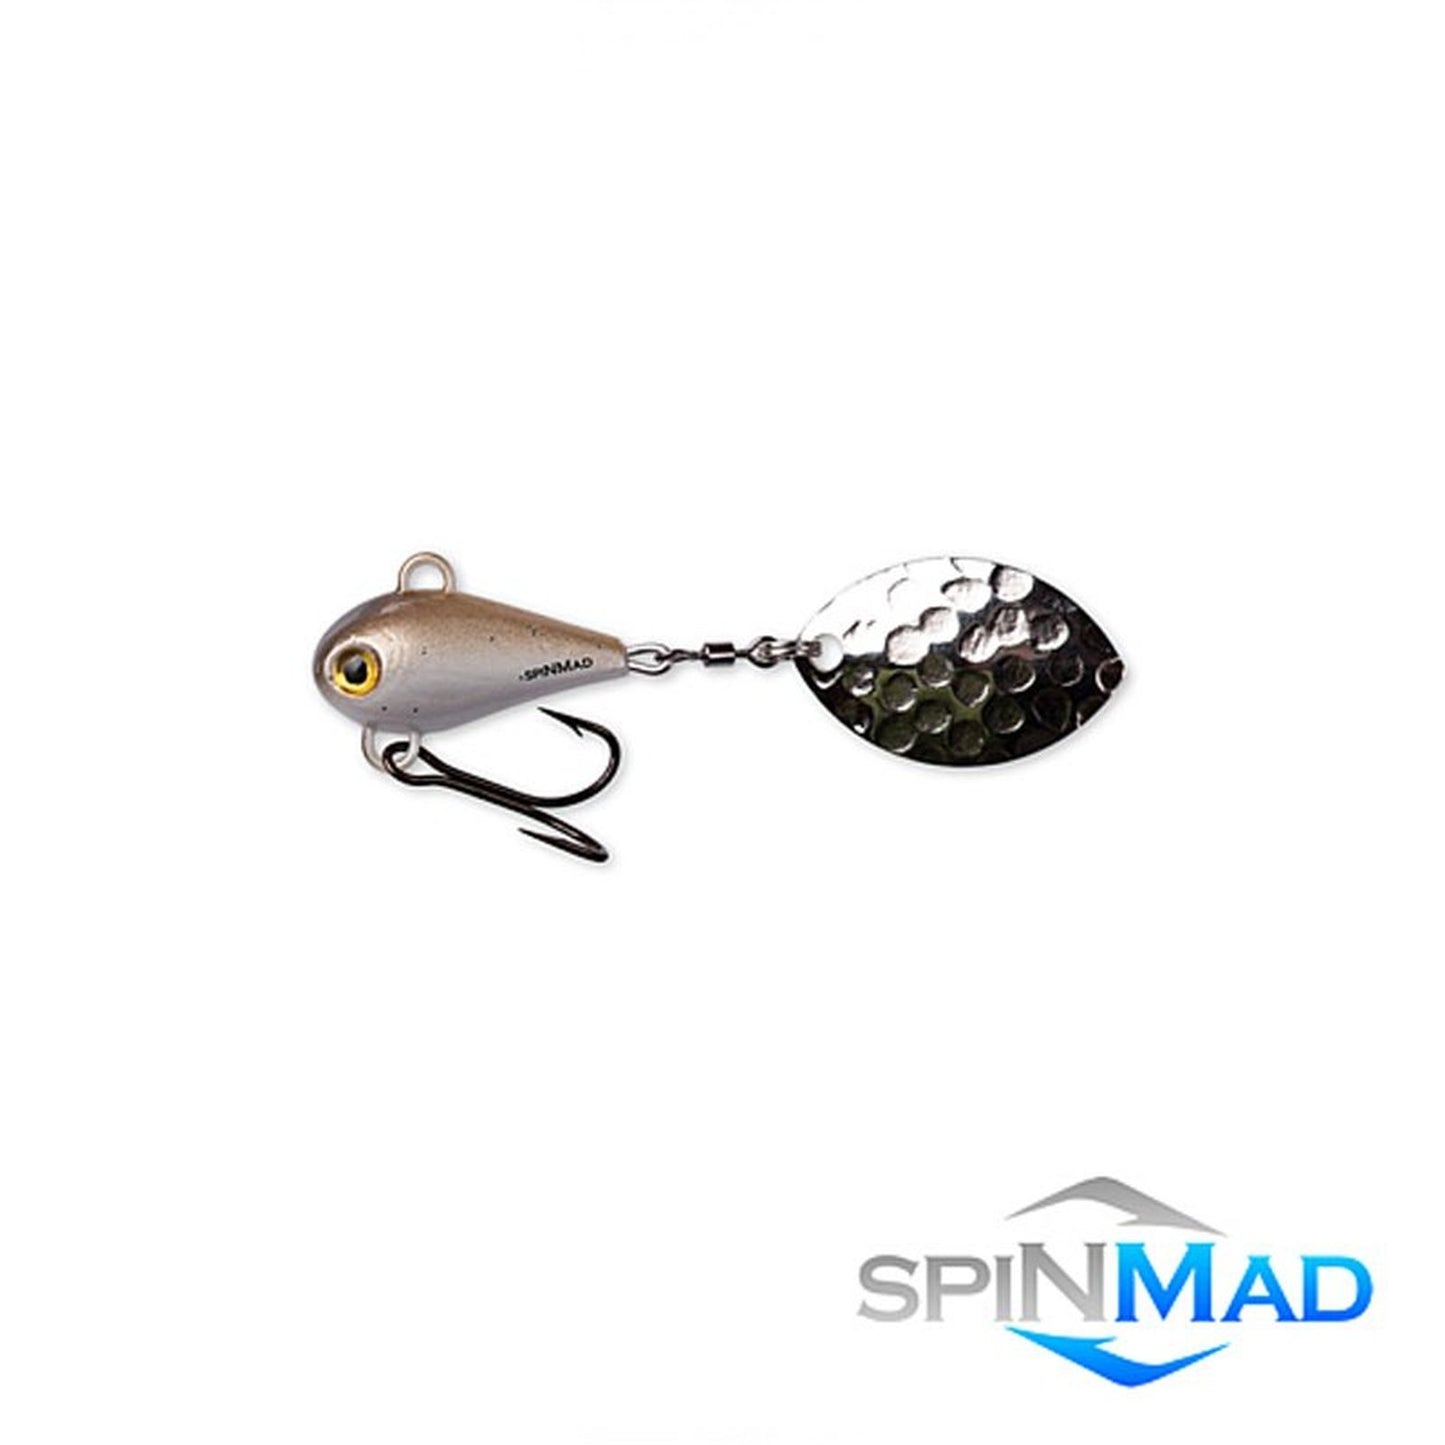 SpinMad MAG 6 0705